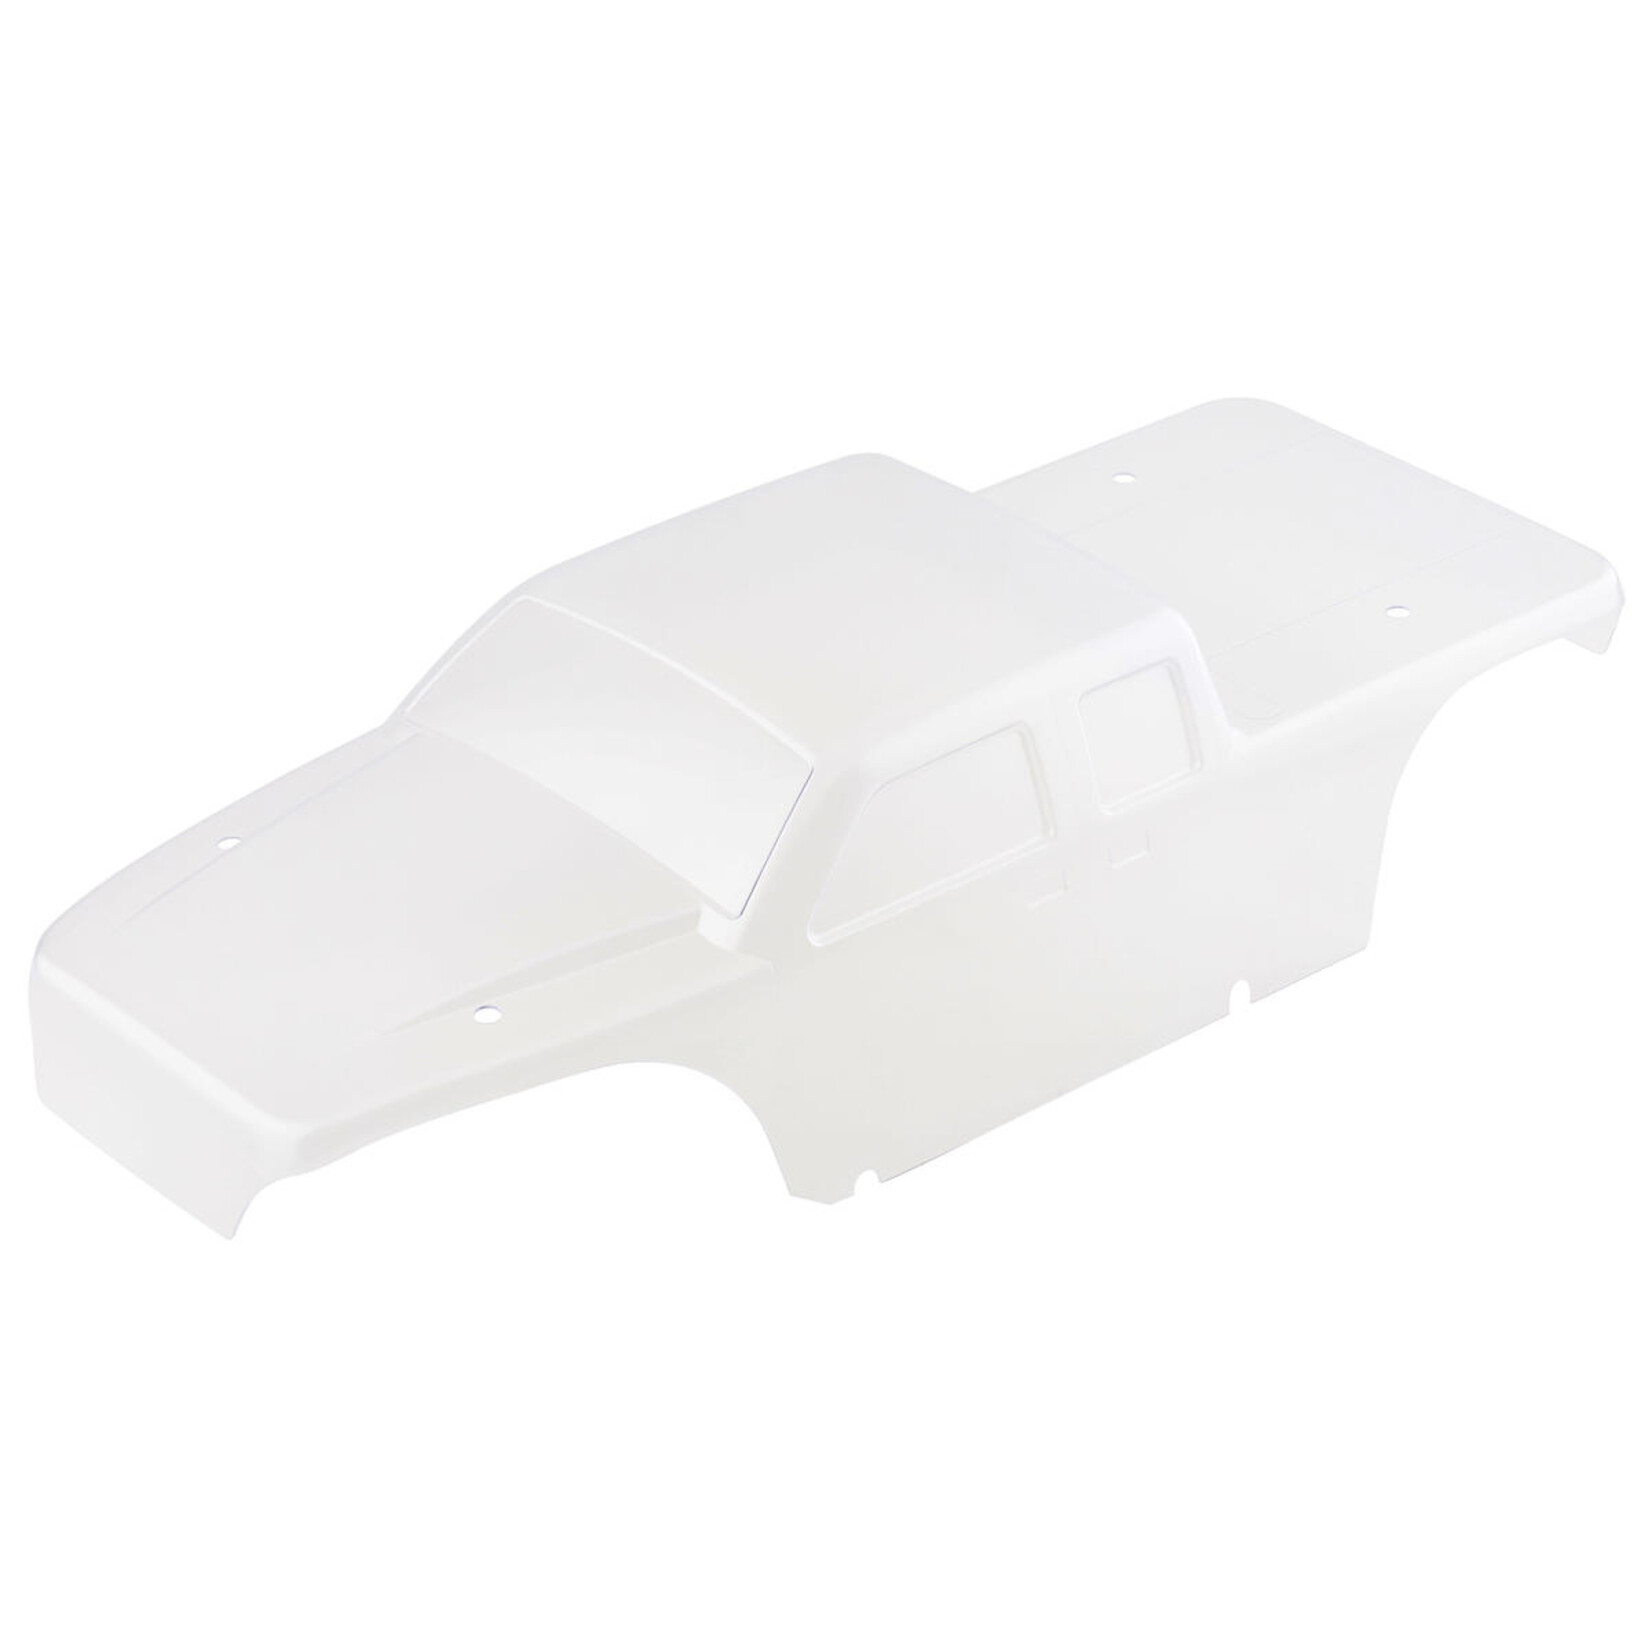 Axial Axial SCX10 Pro Pre-Trimmed Body Set (Clear) #AXI230052